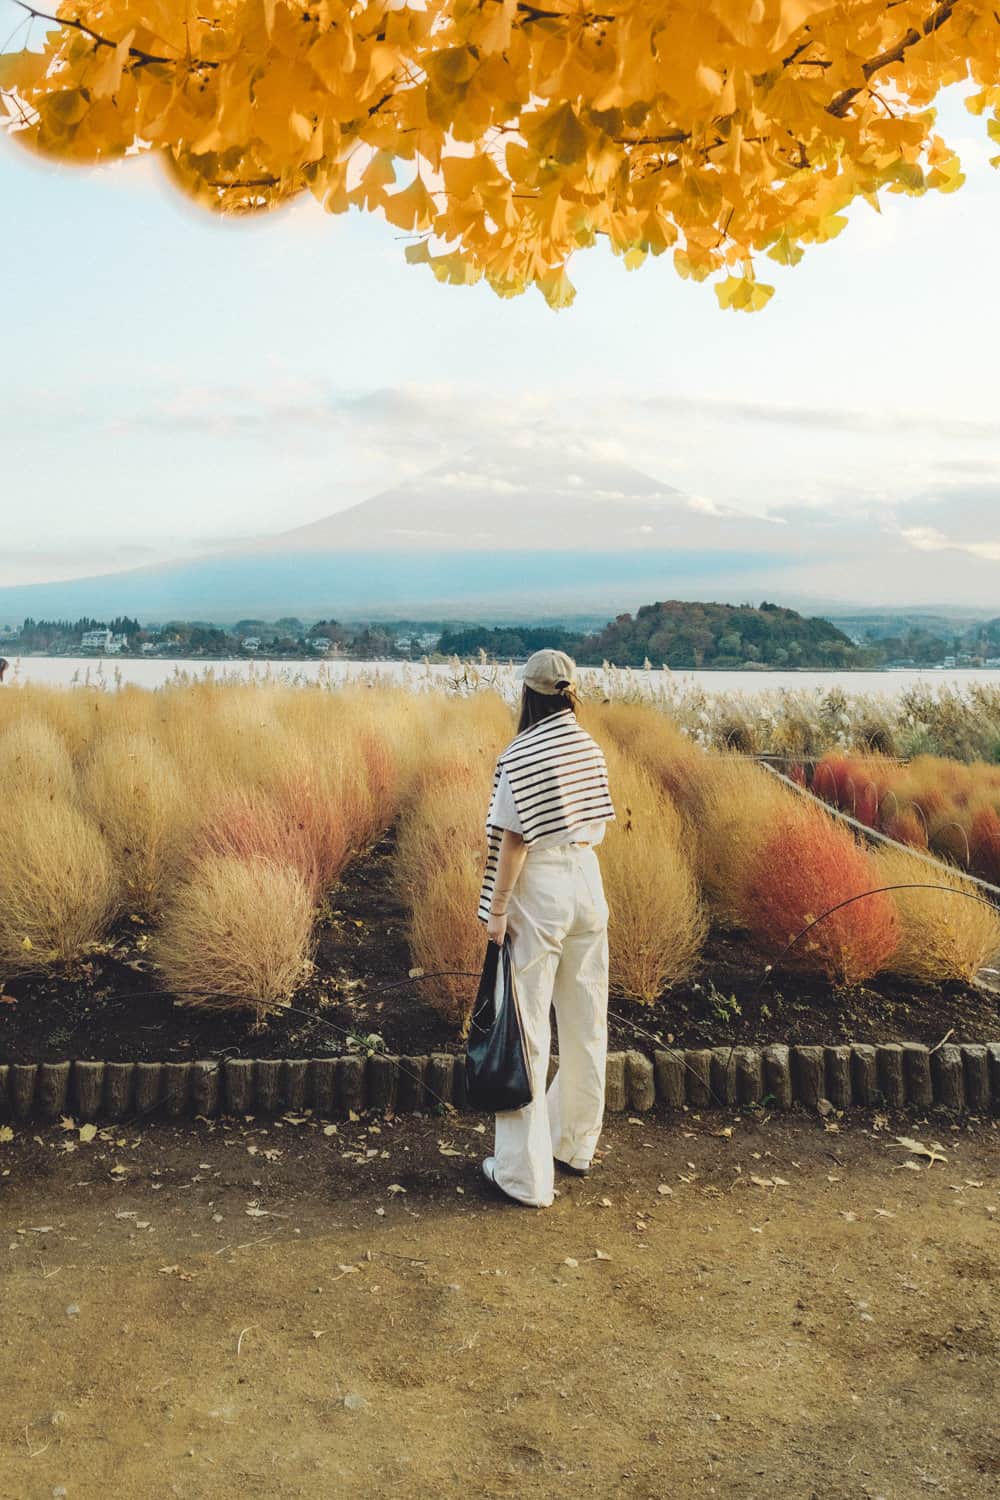 The Ultimate Guide to Fuji Day Trip From Tokyo